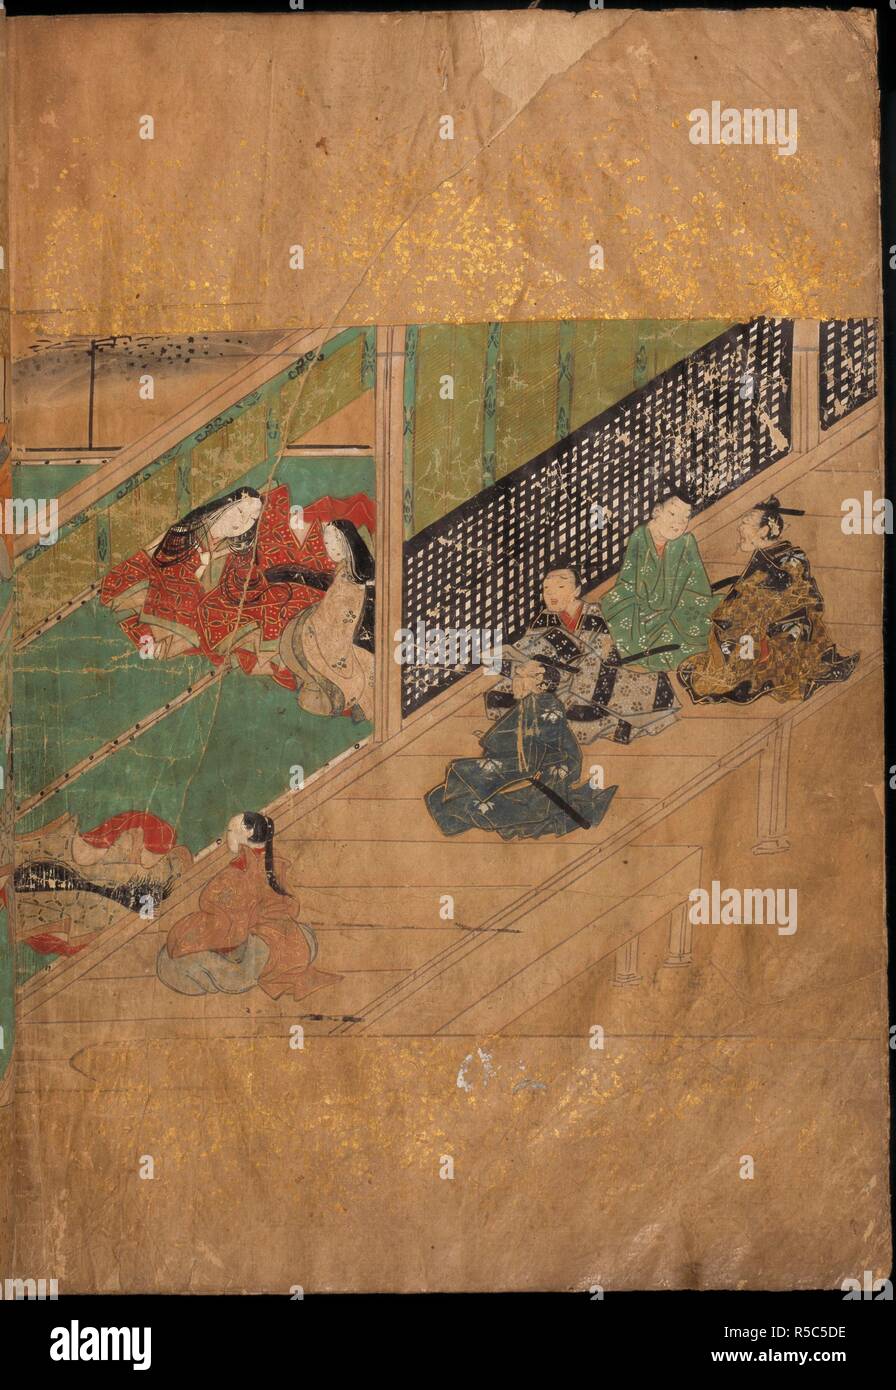 Men sitting on a verandah. Hachikazuki ('Tale of Hachikazuki'). early Edo period (1640-1680). From a manuscript telling the story of a princess forced to wear a bowl on her head and later finding fame and fortune through the divine help of the goddess Kannon.  Image taken from Hachikazuki ('Tale of Hachikazuki').  Originally published/produced in early Edo period (1640-1680). . Source: Or. 12897 volume 1, f.21v. Language: Japanese. Stock Photo